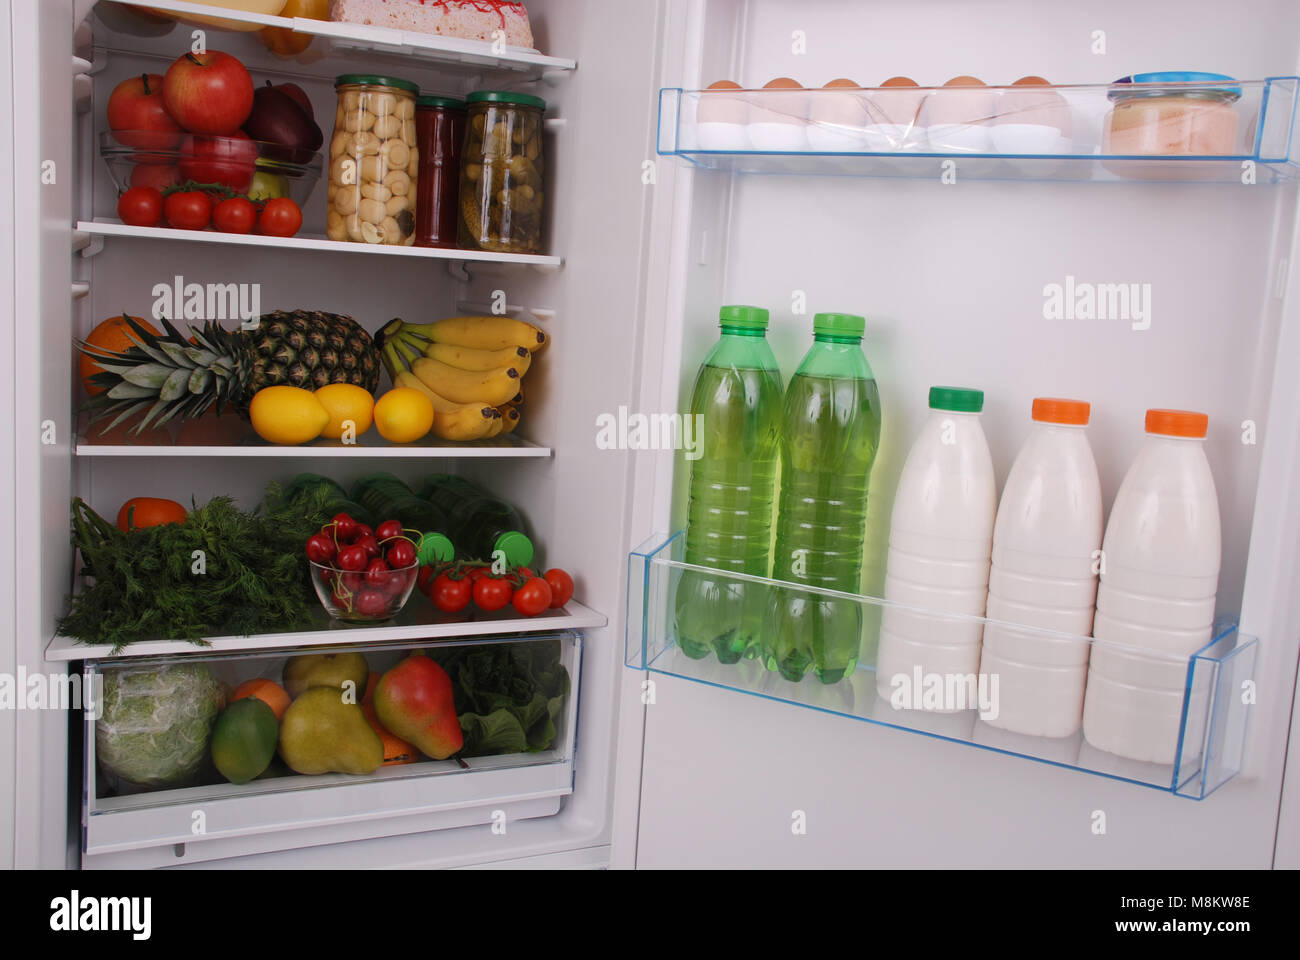 Open refrigerator full with some kinds of food and drinks Stock Photo